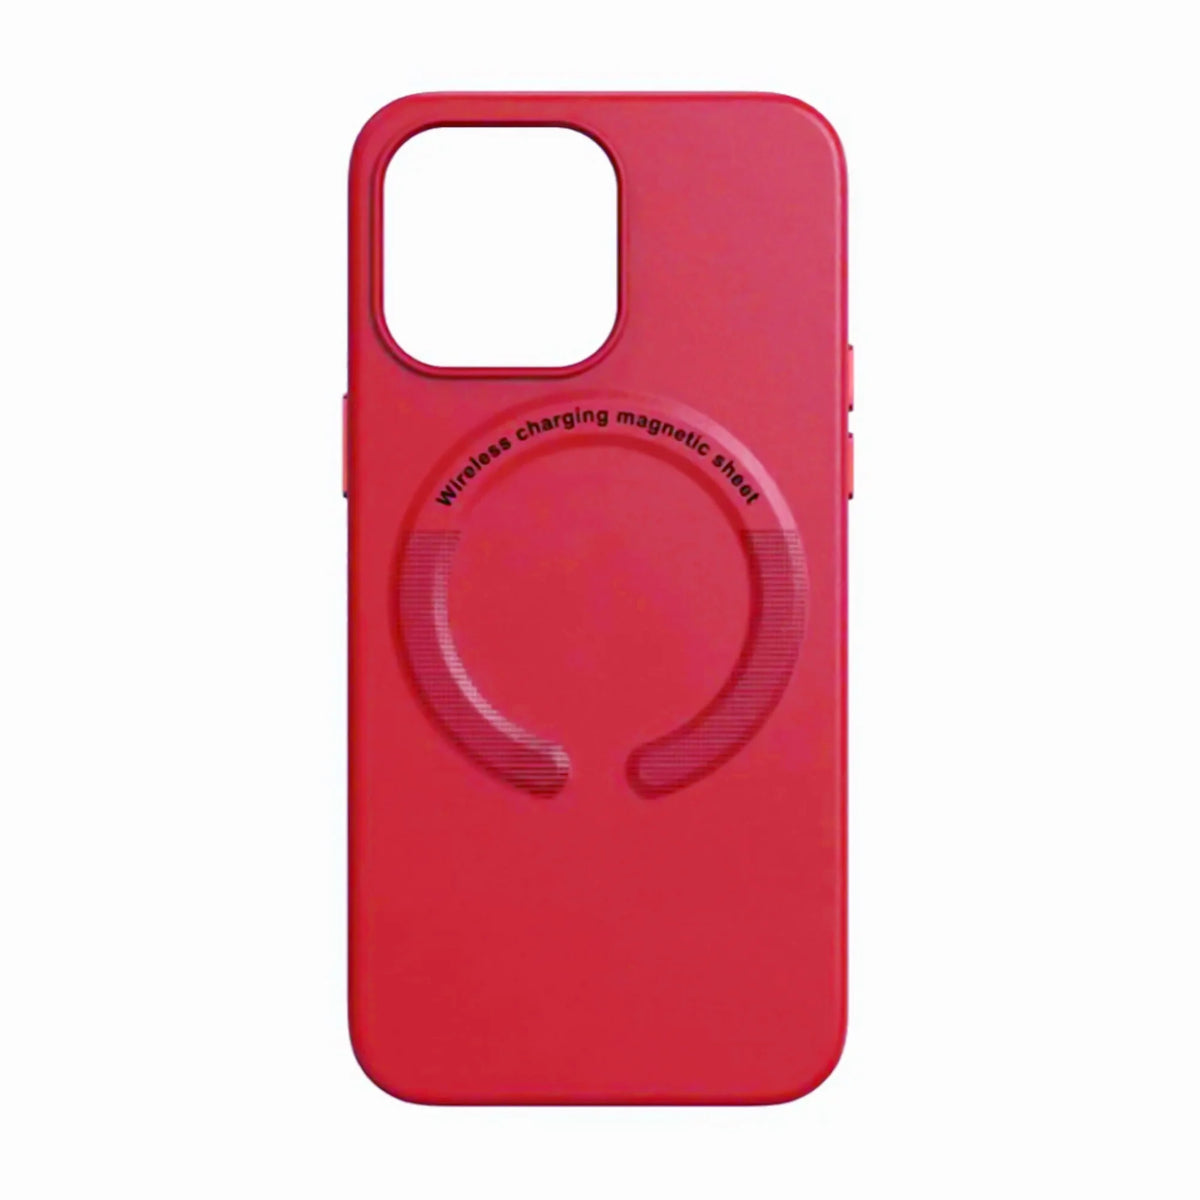 iPhone Leather Magsafe Case - Red